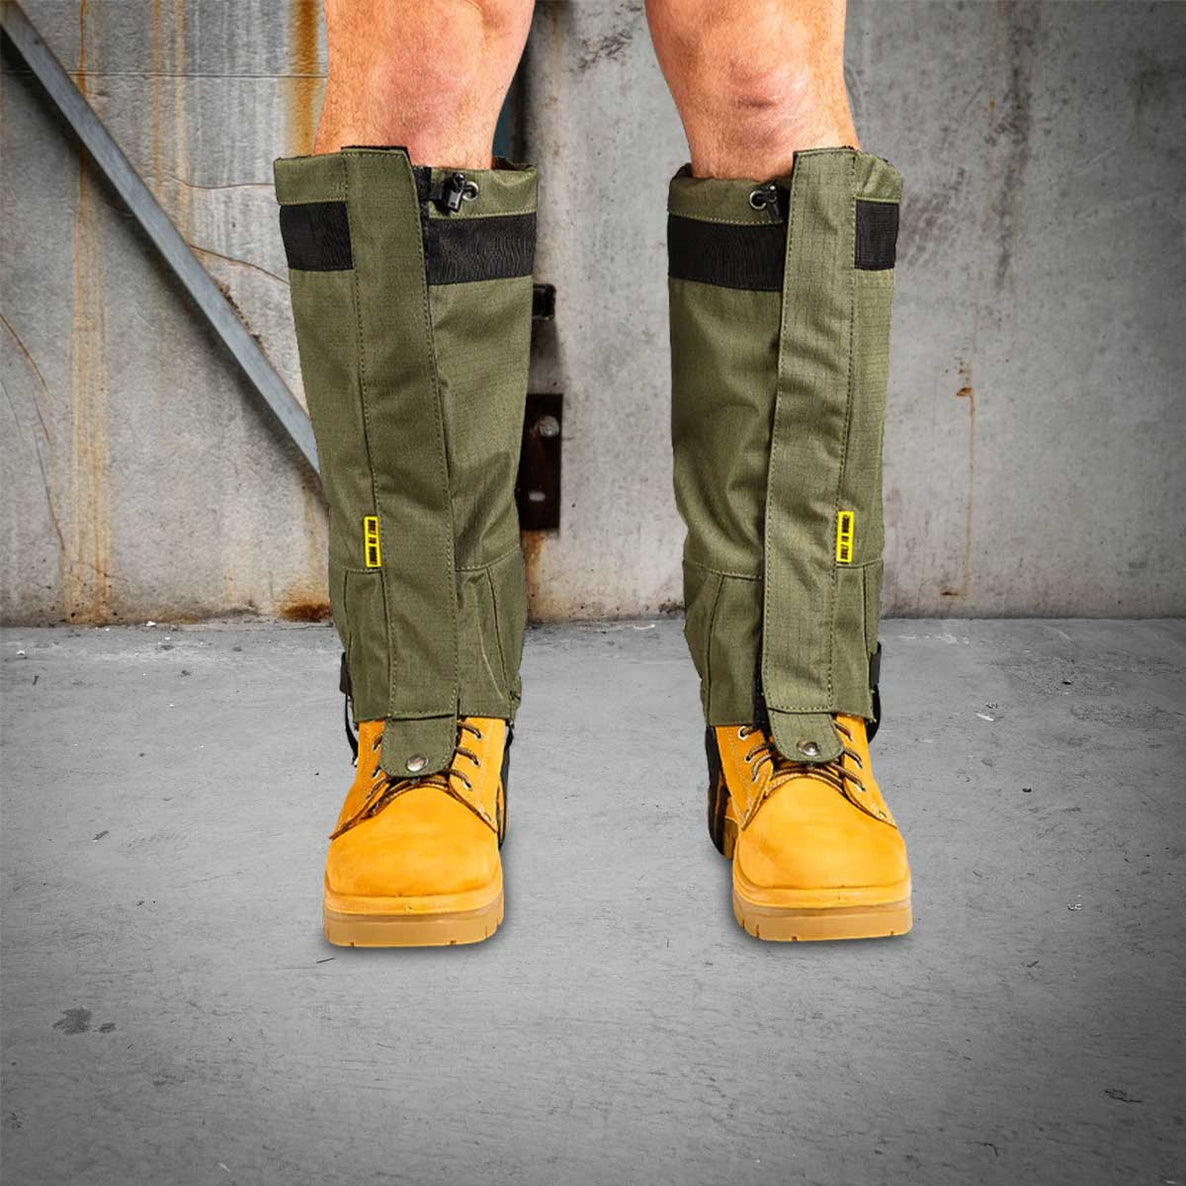 Leg Gaiters RX04A305 by Rugged Xtremes